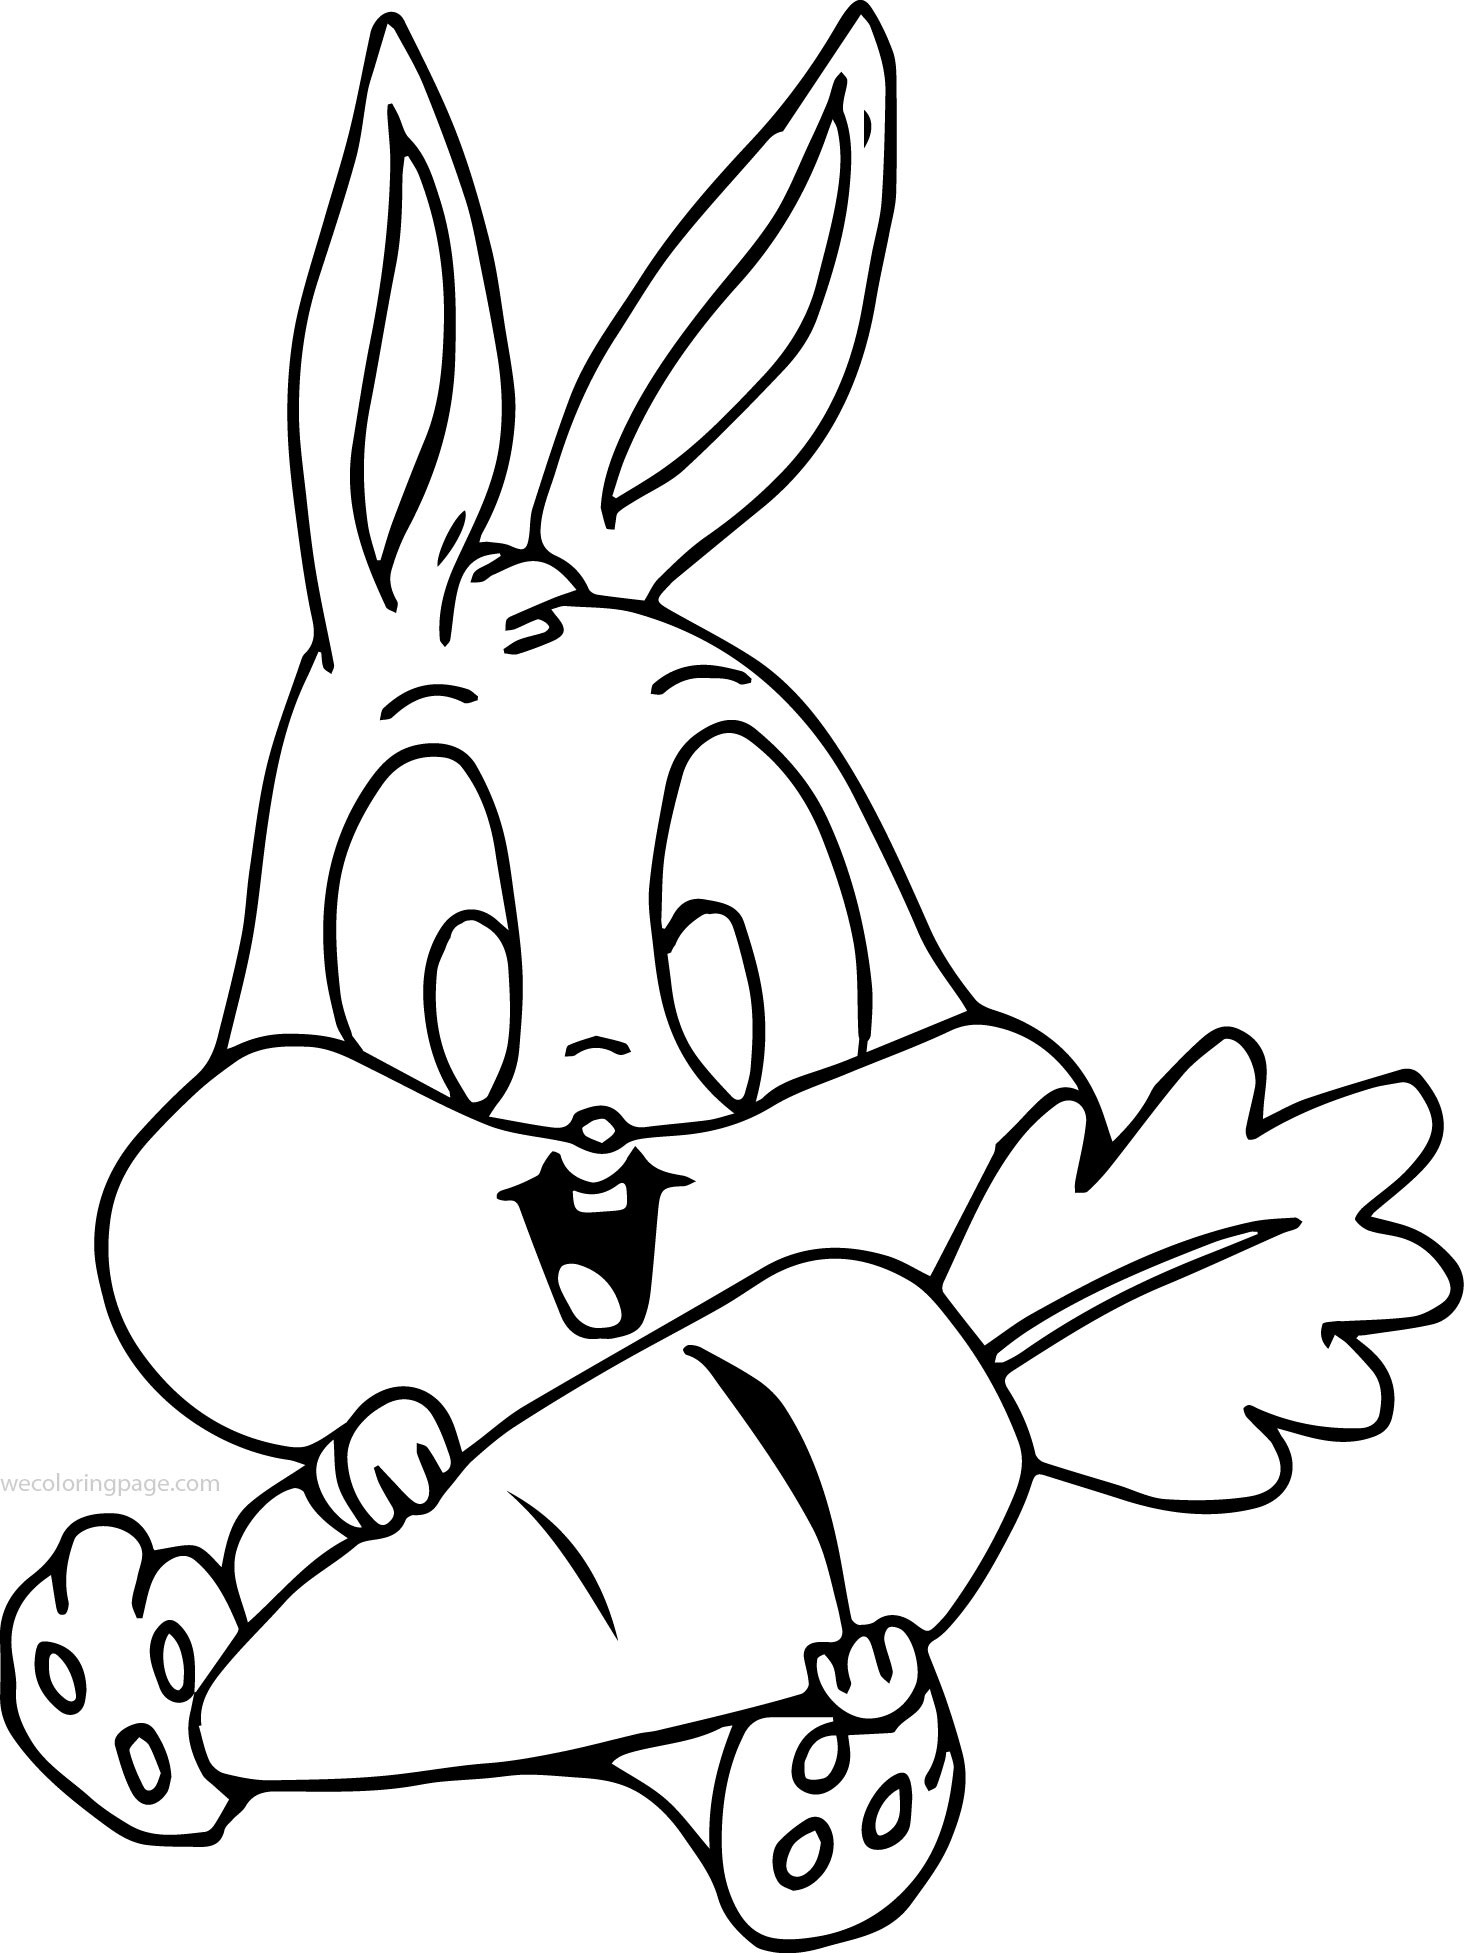 Baby Rabbit Coloring Pages
 Baby Bugs Bunny Holding Carrot Coloring Page